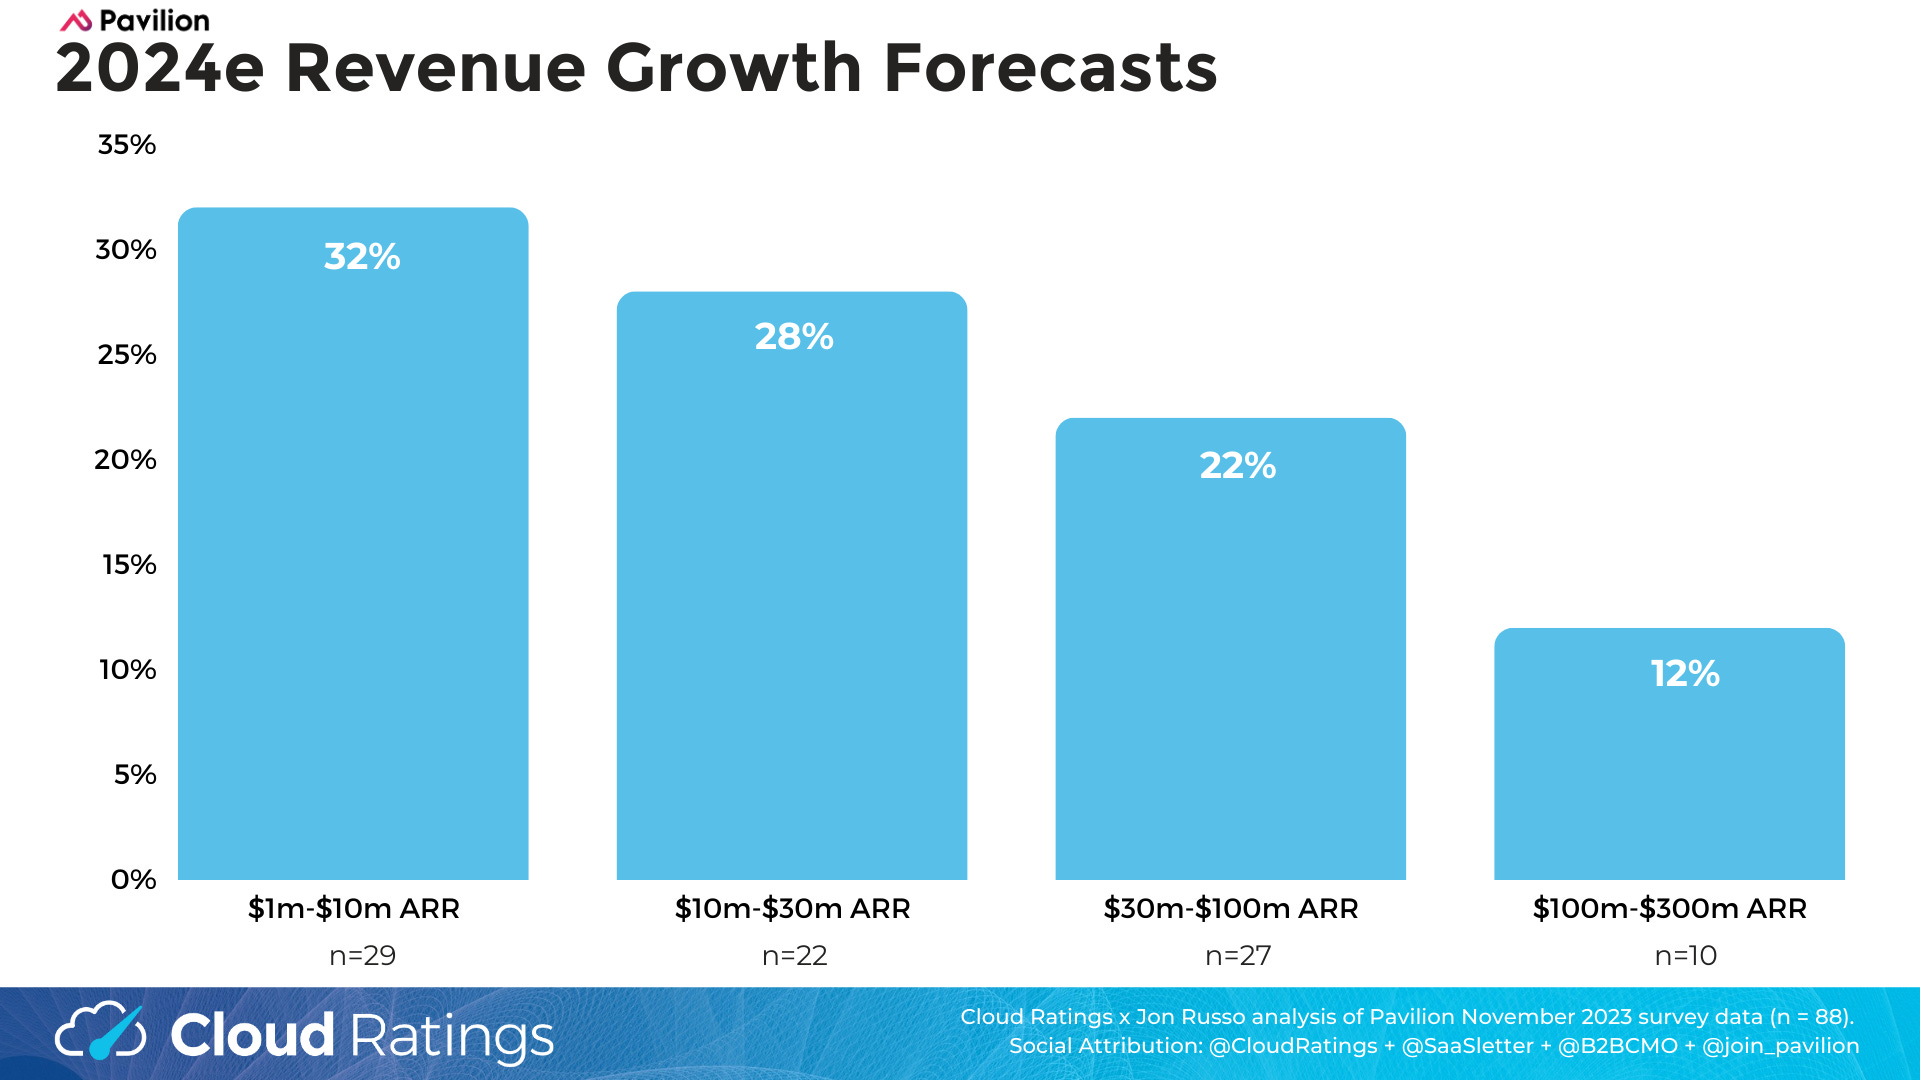 9 Free Sales Forecast Templates to Super-Charge Sales Growth in 2024